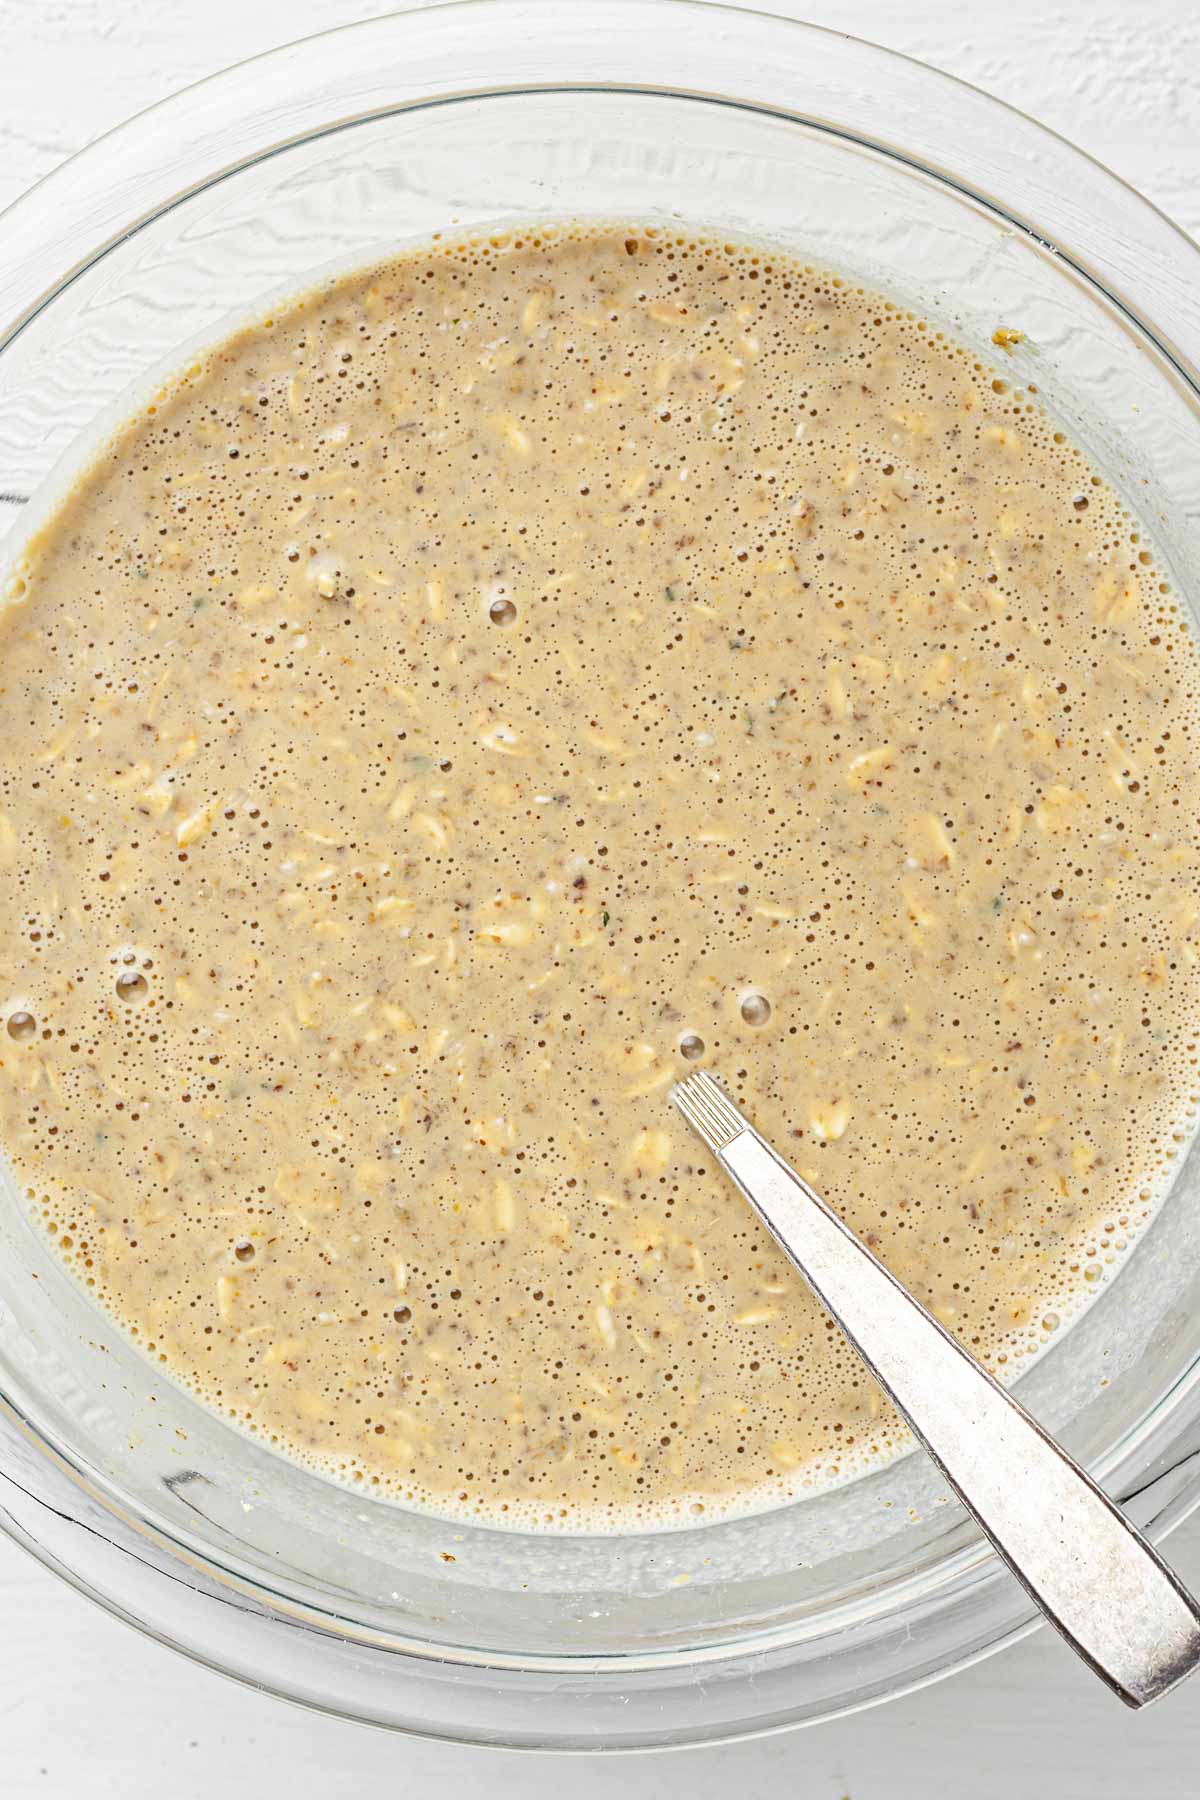 Prepared overnight oats in a large bowl.